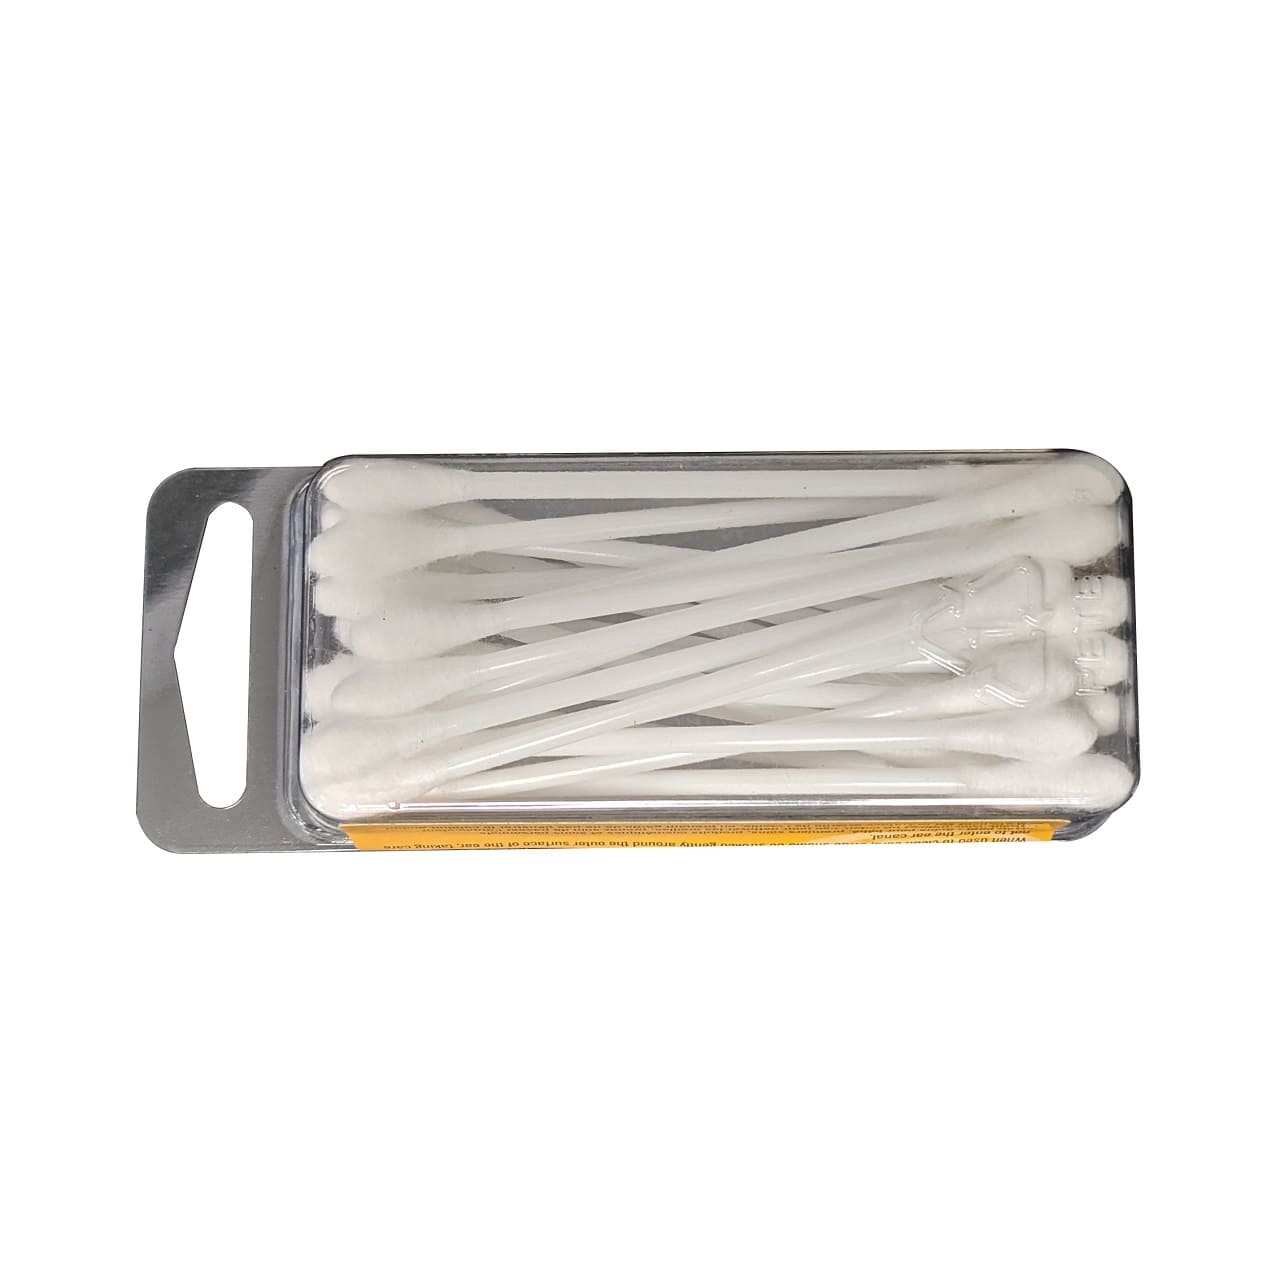 Product image for Mansfield Flexible Cotton Swabs (24 count)